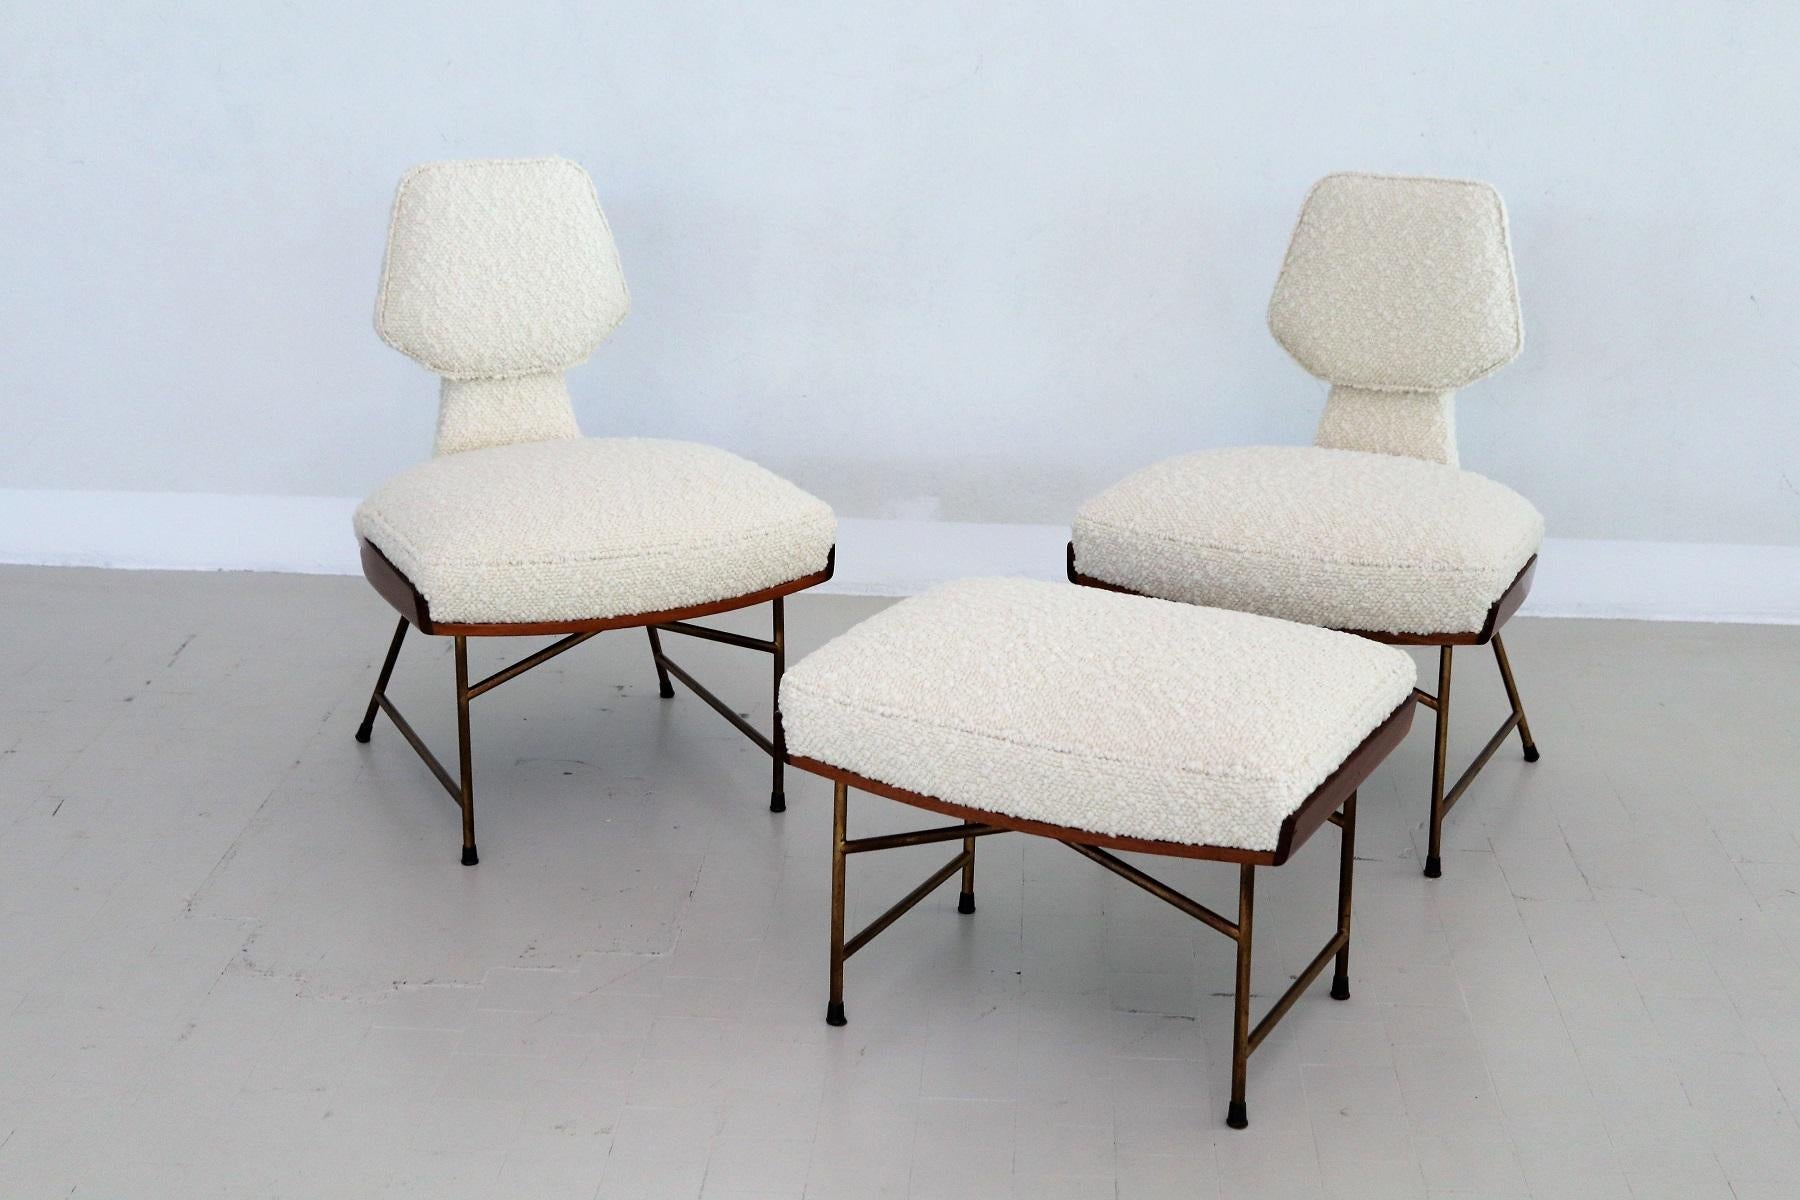 Gorgeous and very rare set of three pieces composed of two low slipper chairs and one stool or footstool.
Made in Italy in the 1950s, original pieces.
The peculiarity of this set is undoubtedly the shape of the backrests and the seat, never seen